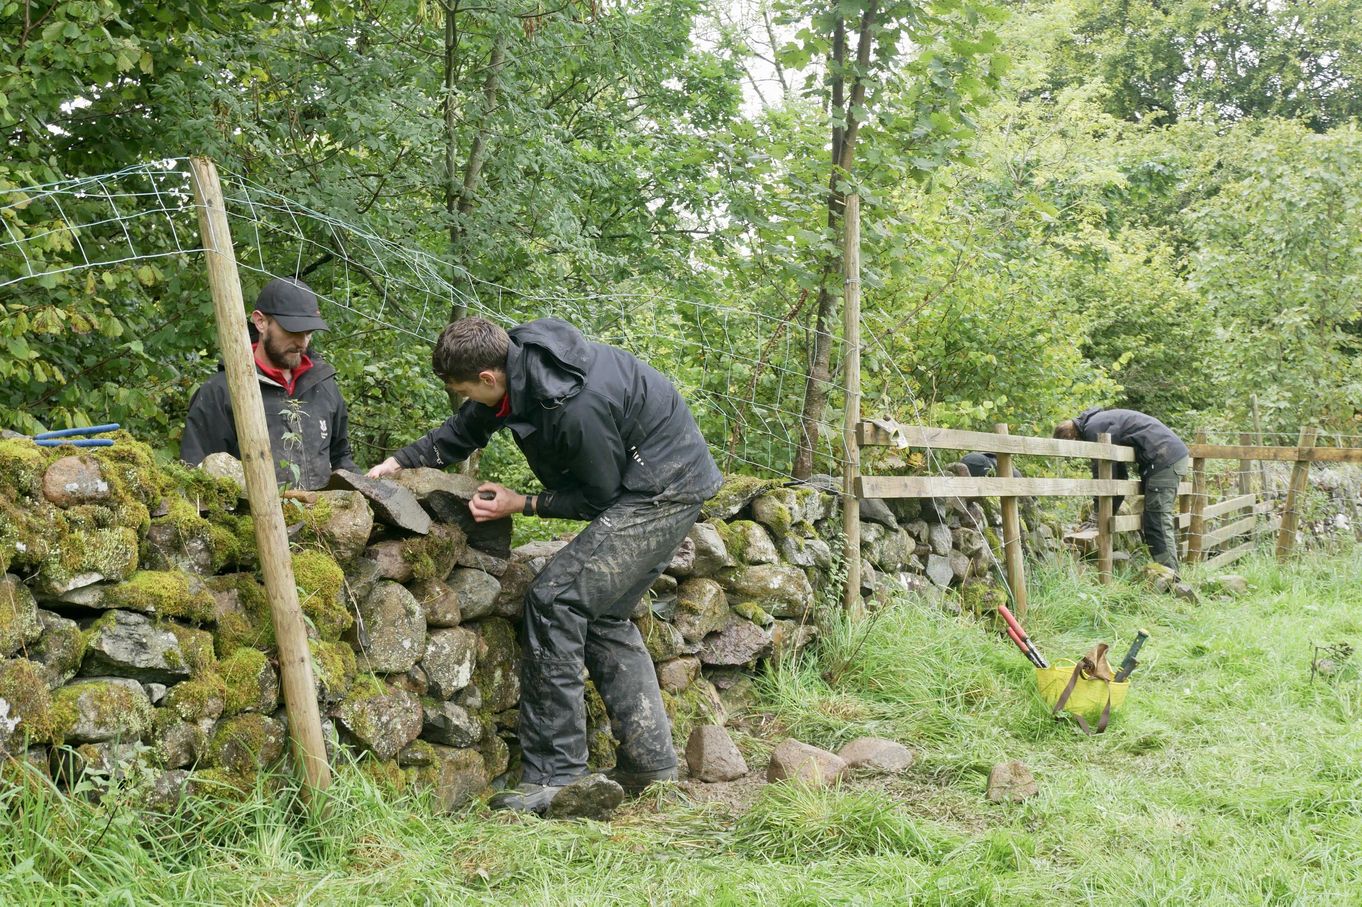 image 2 - repairing a section of dry stone wall at great wood in borrowdale. photo credit - anna place.jpg